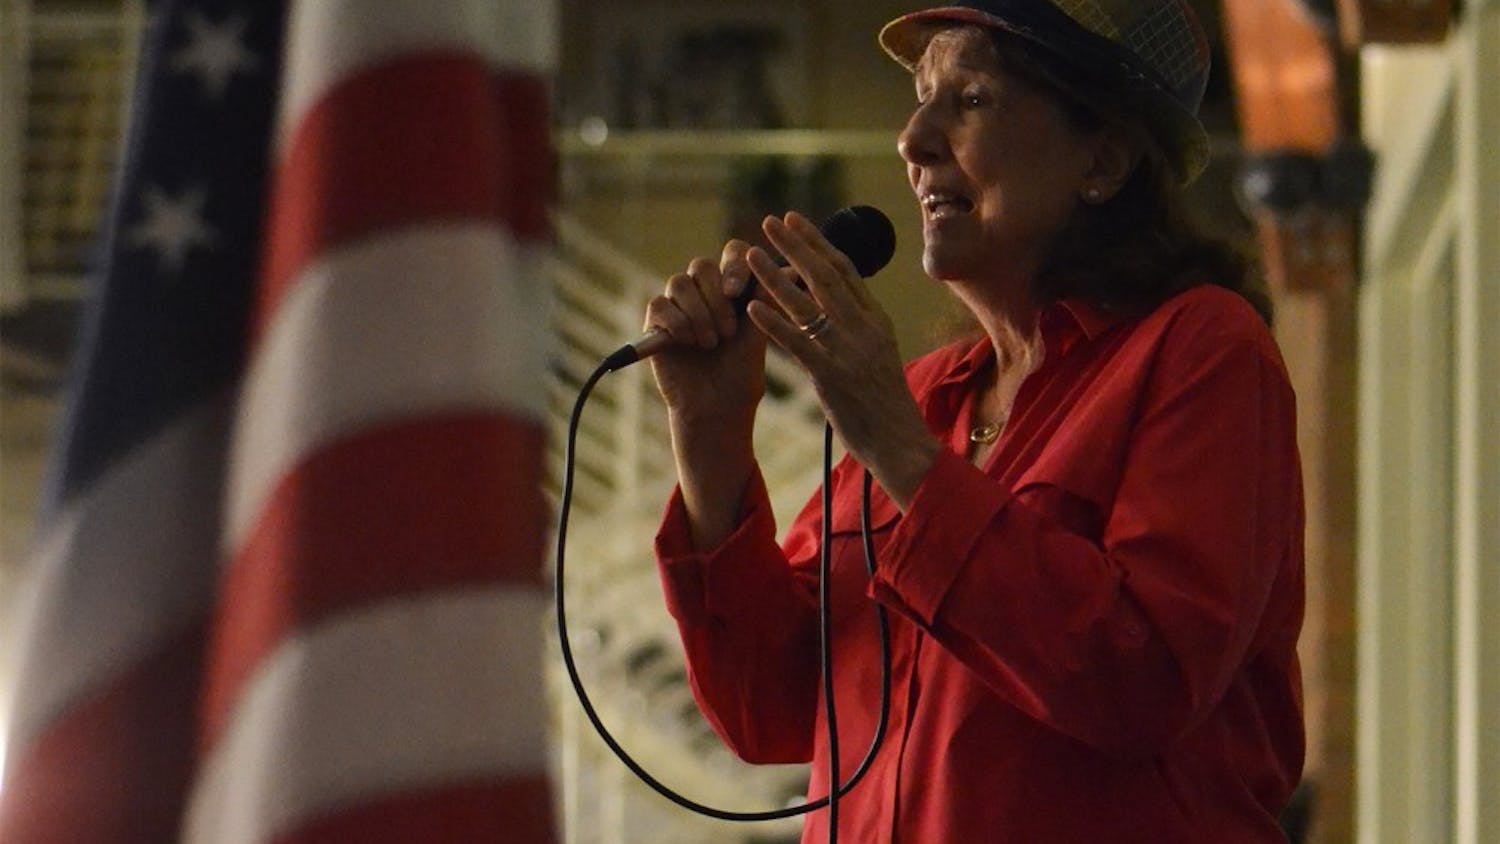 The Orange County Department on Aging invited local veterans to celebrate a Veterans' Music Fest on Nov. 9. Marie Vanderbeck sings for the crowd.